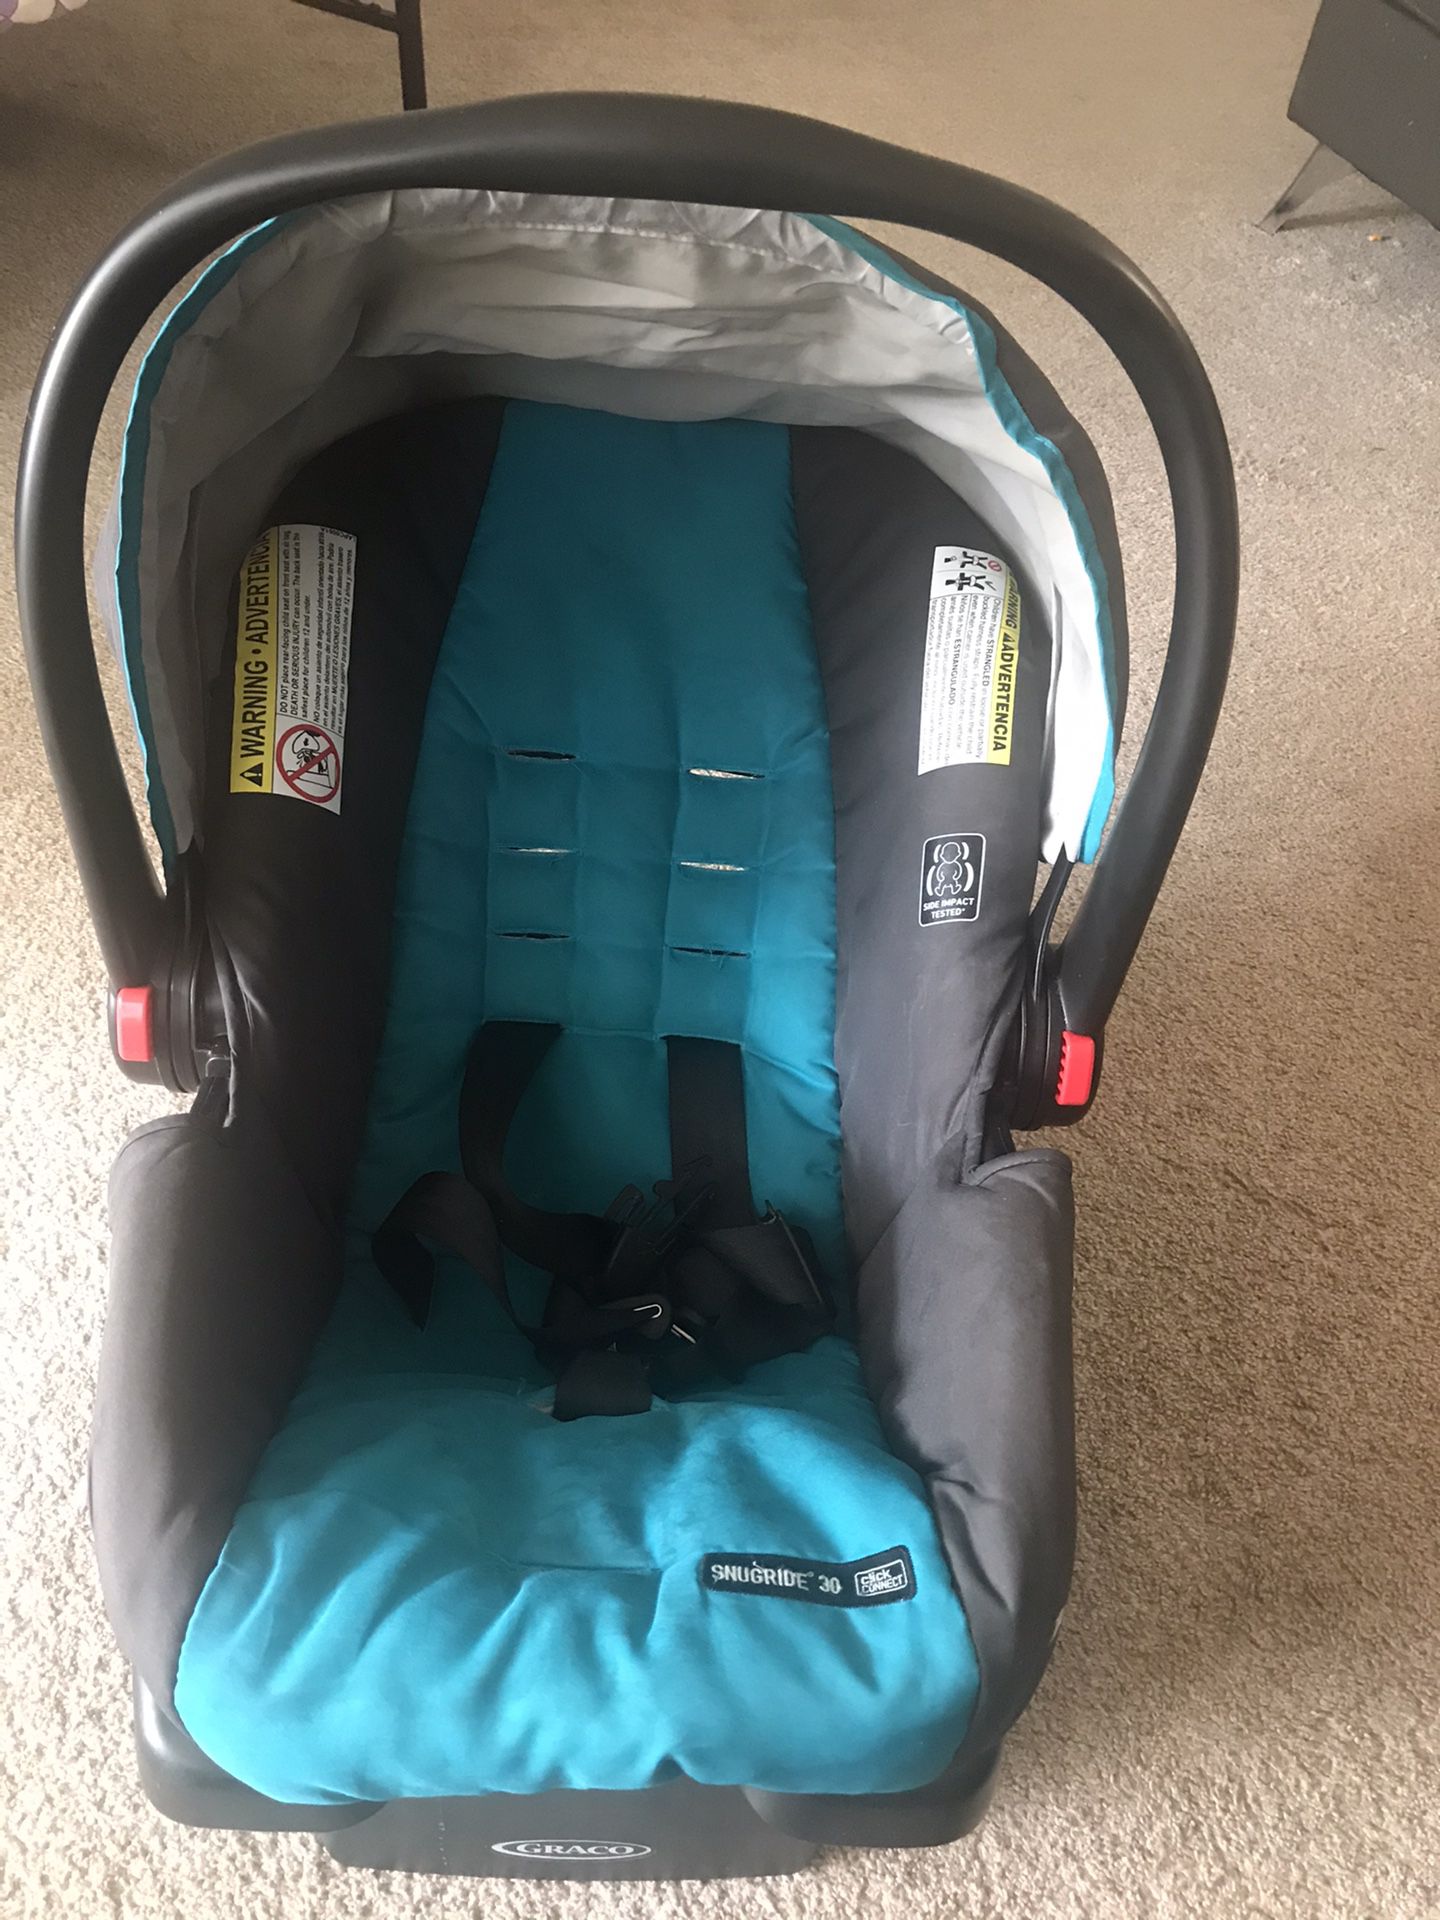 Graco snugride 30 click connect infant car seat and base